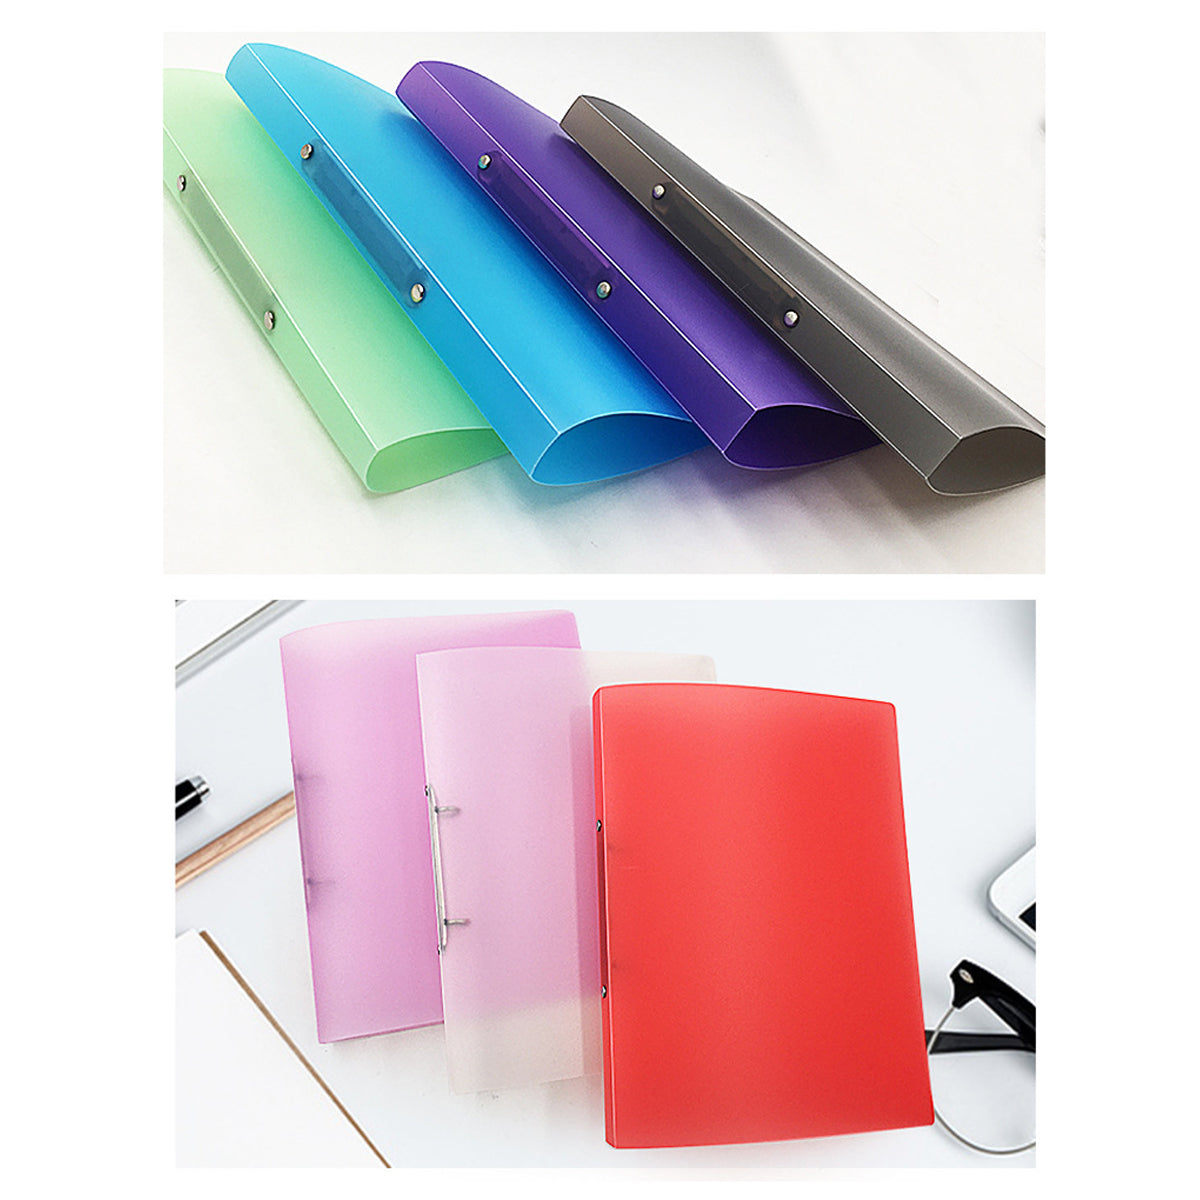 2 Ring Binder,Binder Organizer Holds 8.5’’ x 11’’ Paper with Tag